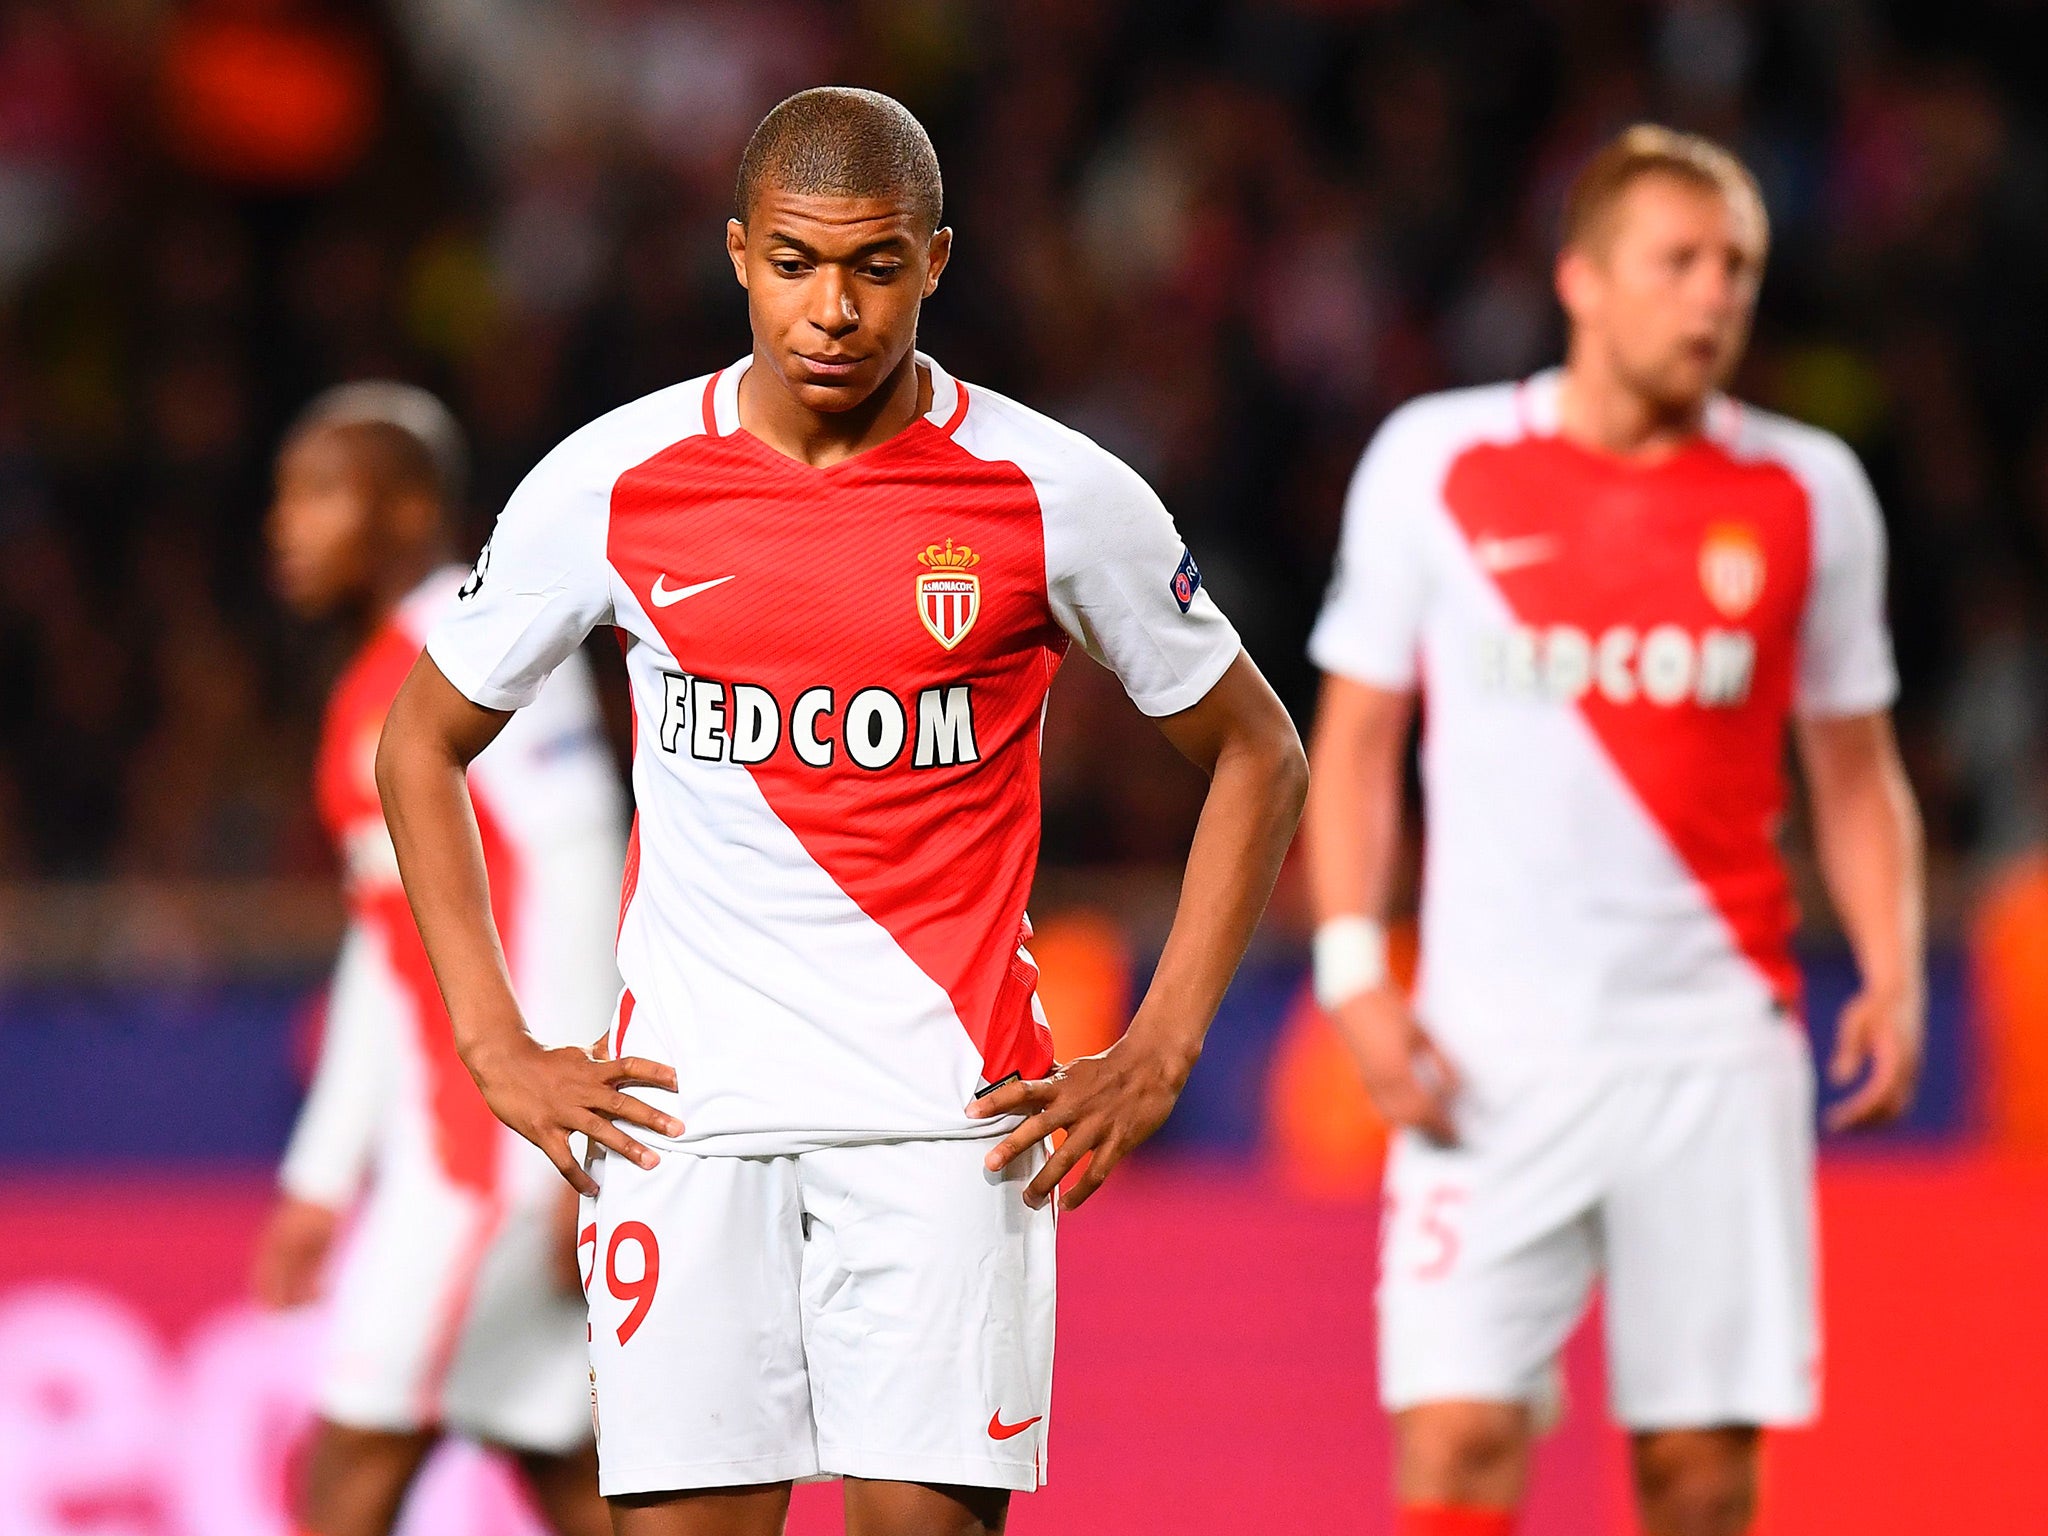 Monaco could not break down Juventus' defence in the first leg